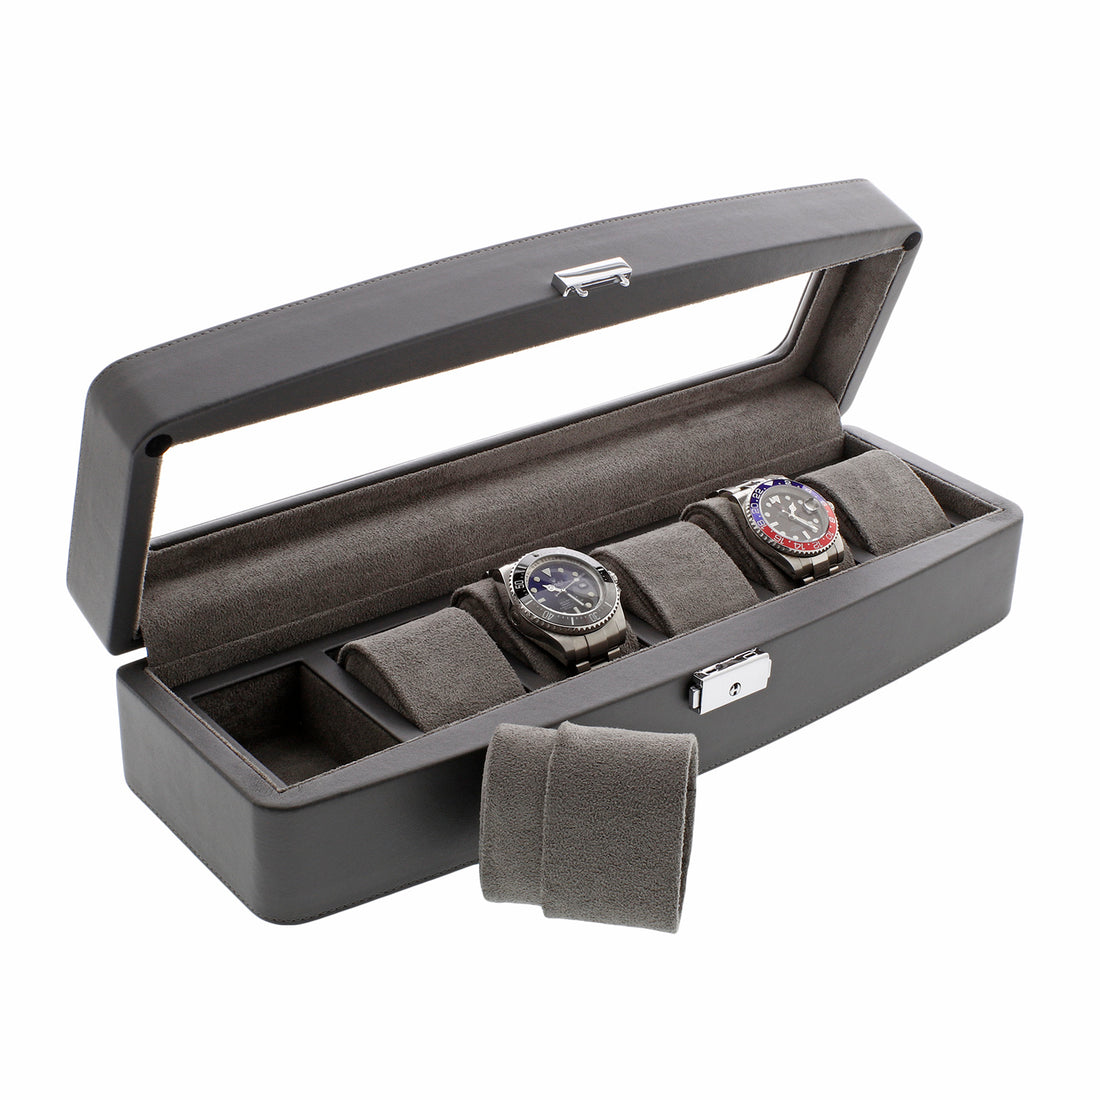 Luxurious Quality Watch Cases by Aevitas – Protect Your Timeless Investment